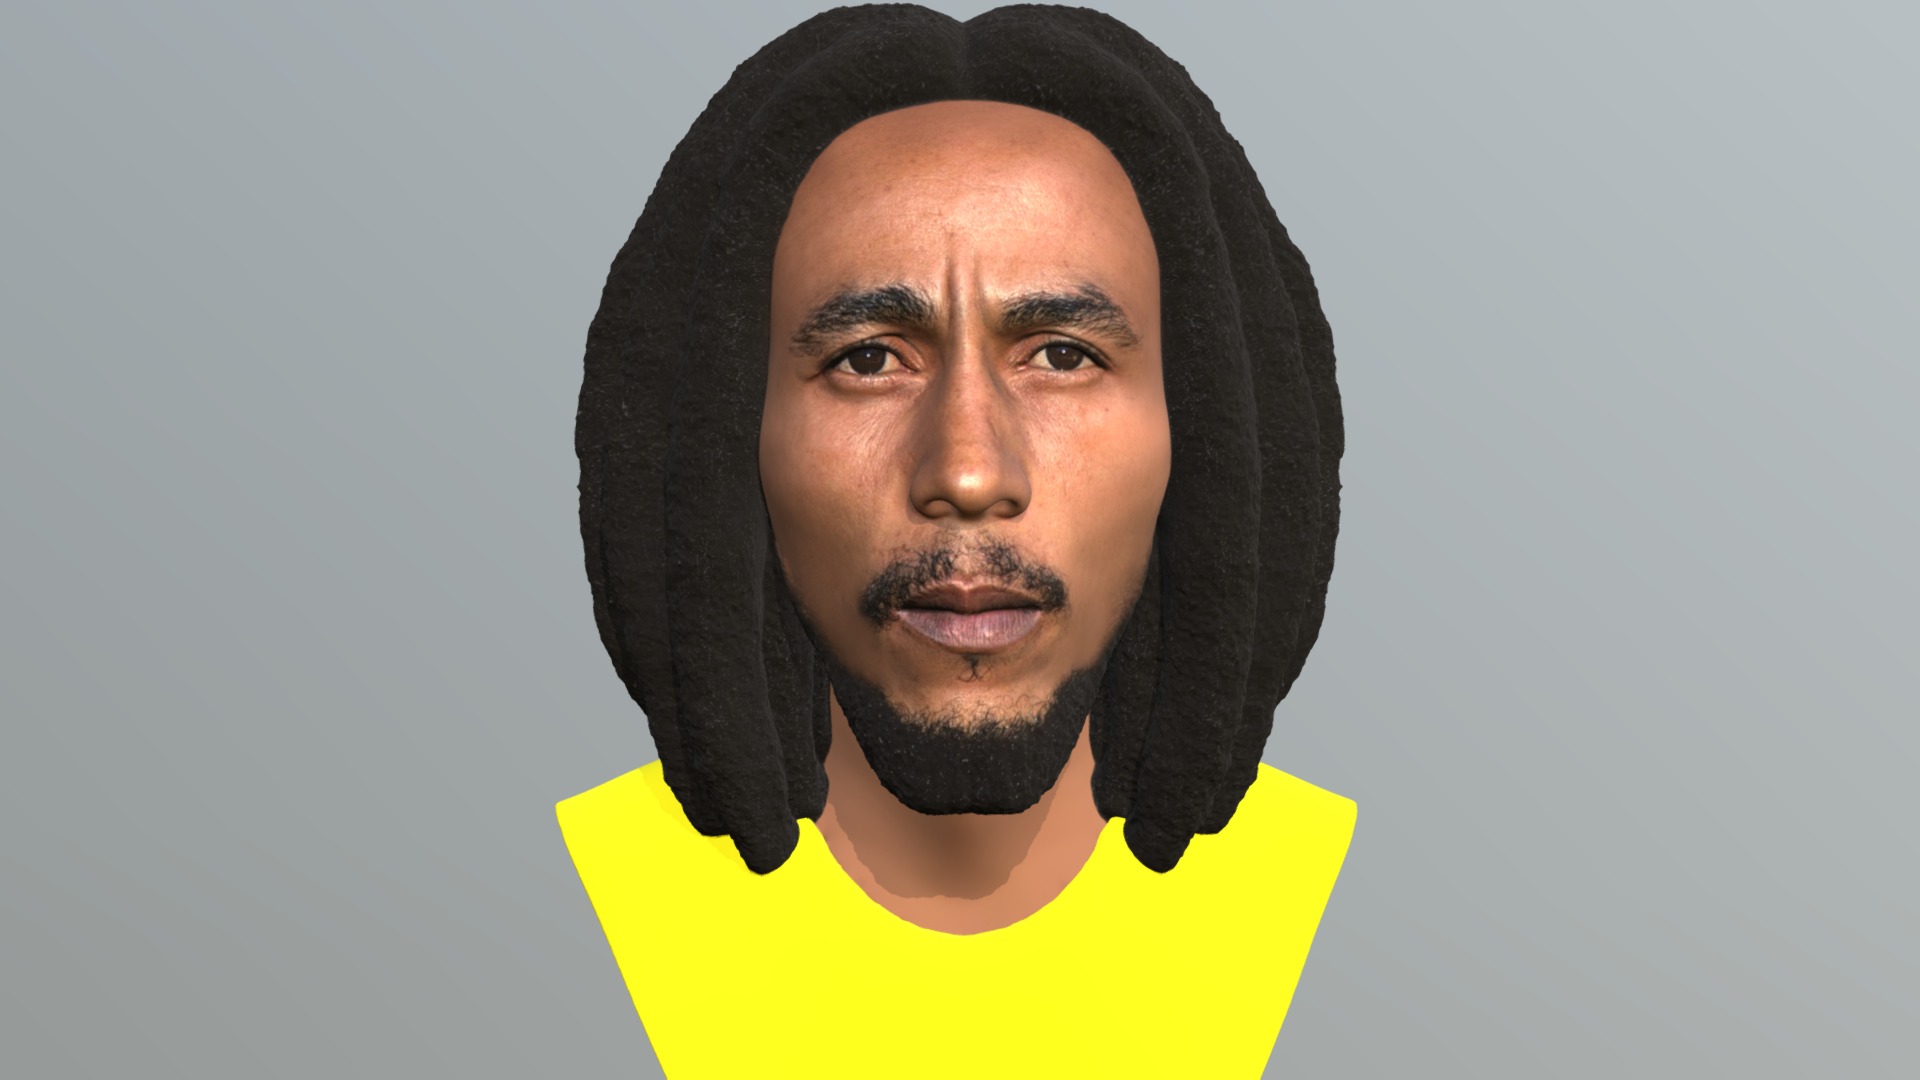 3D model Bob Marley bust for full color 3D printing - This is a 3D model of the Bob Marley bust for full color 3D printing. The 3D model is about a person with a black head covering.